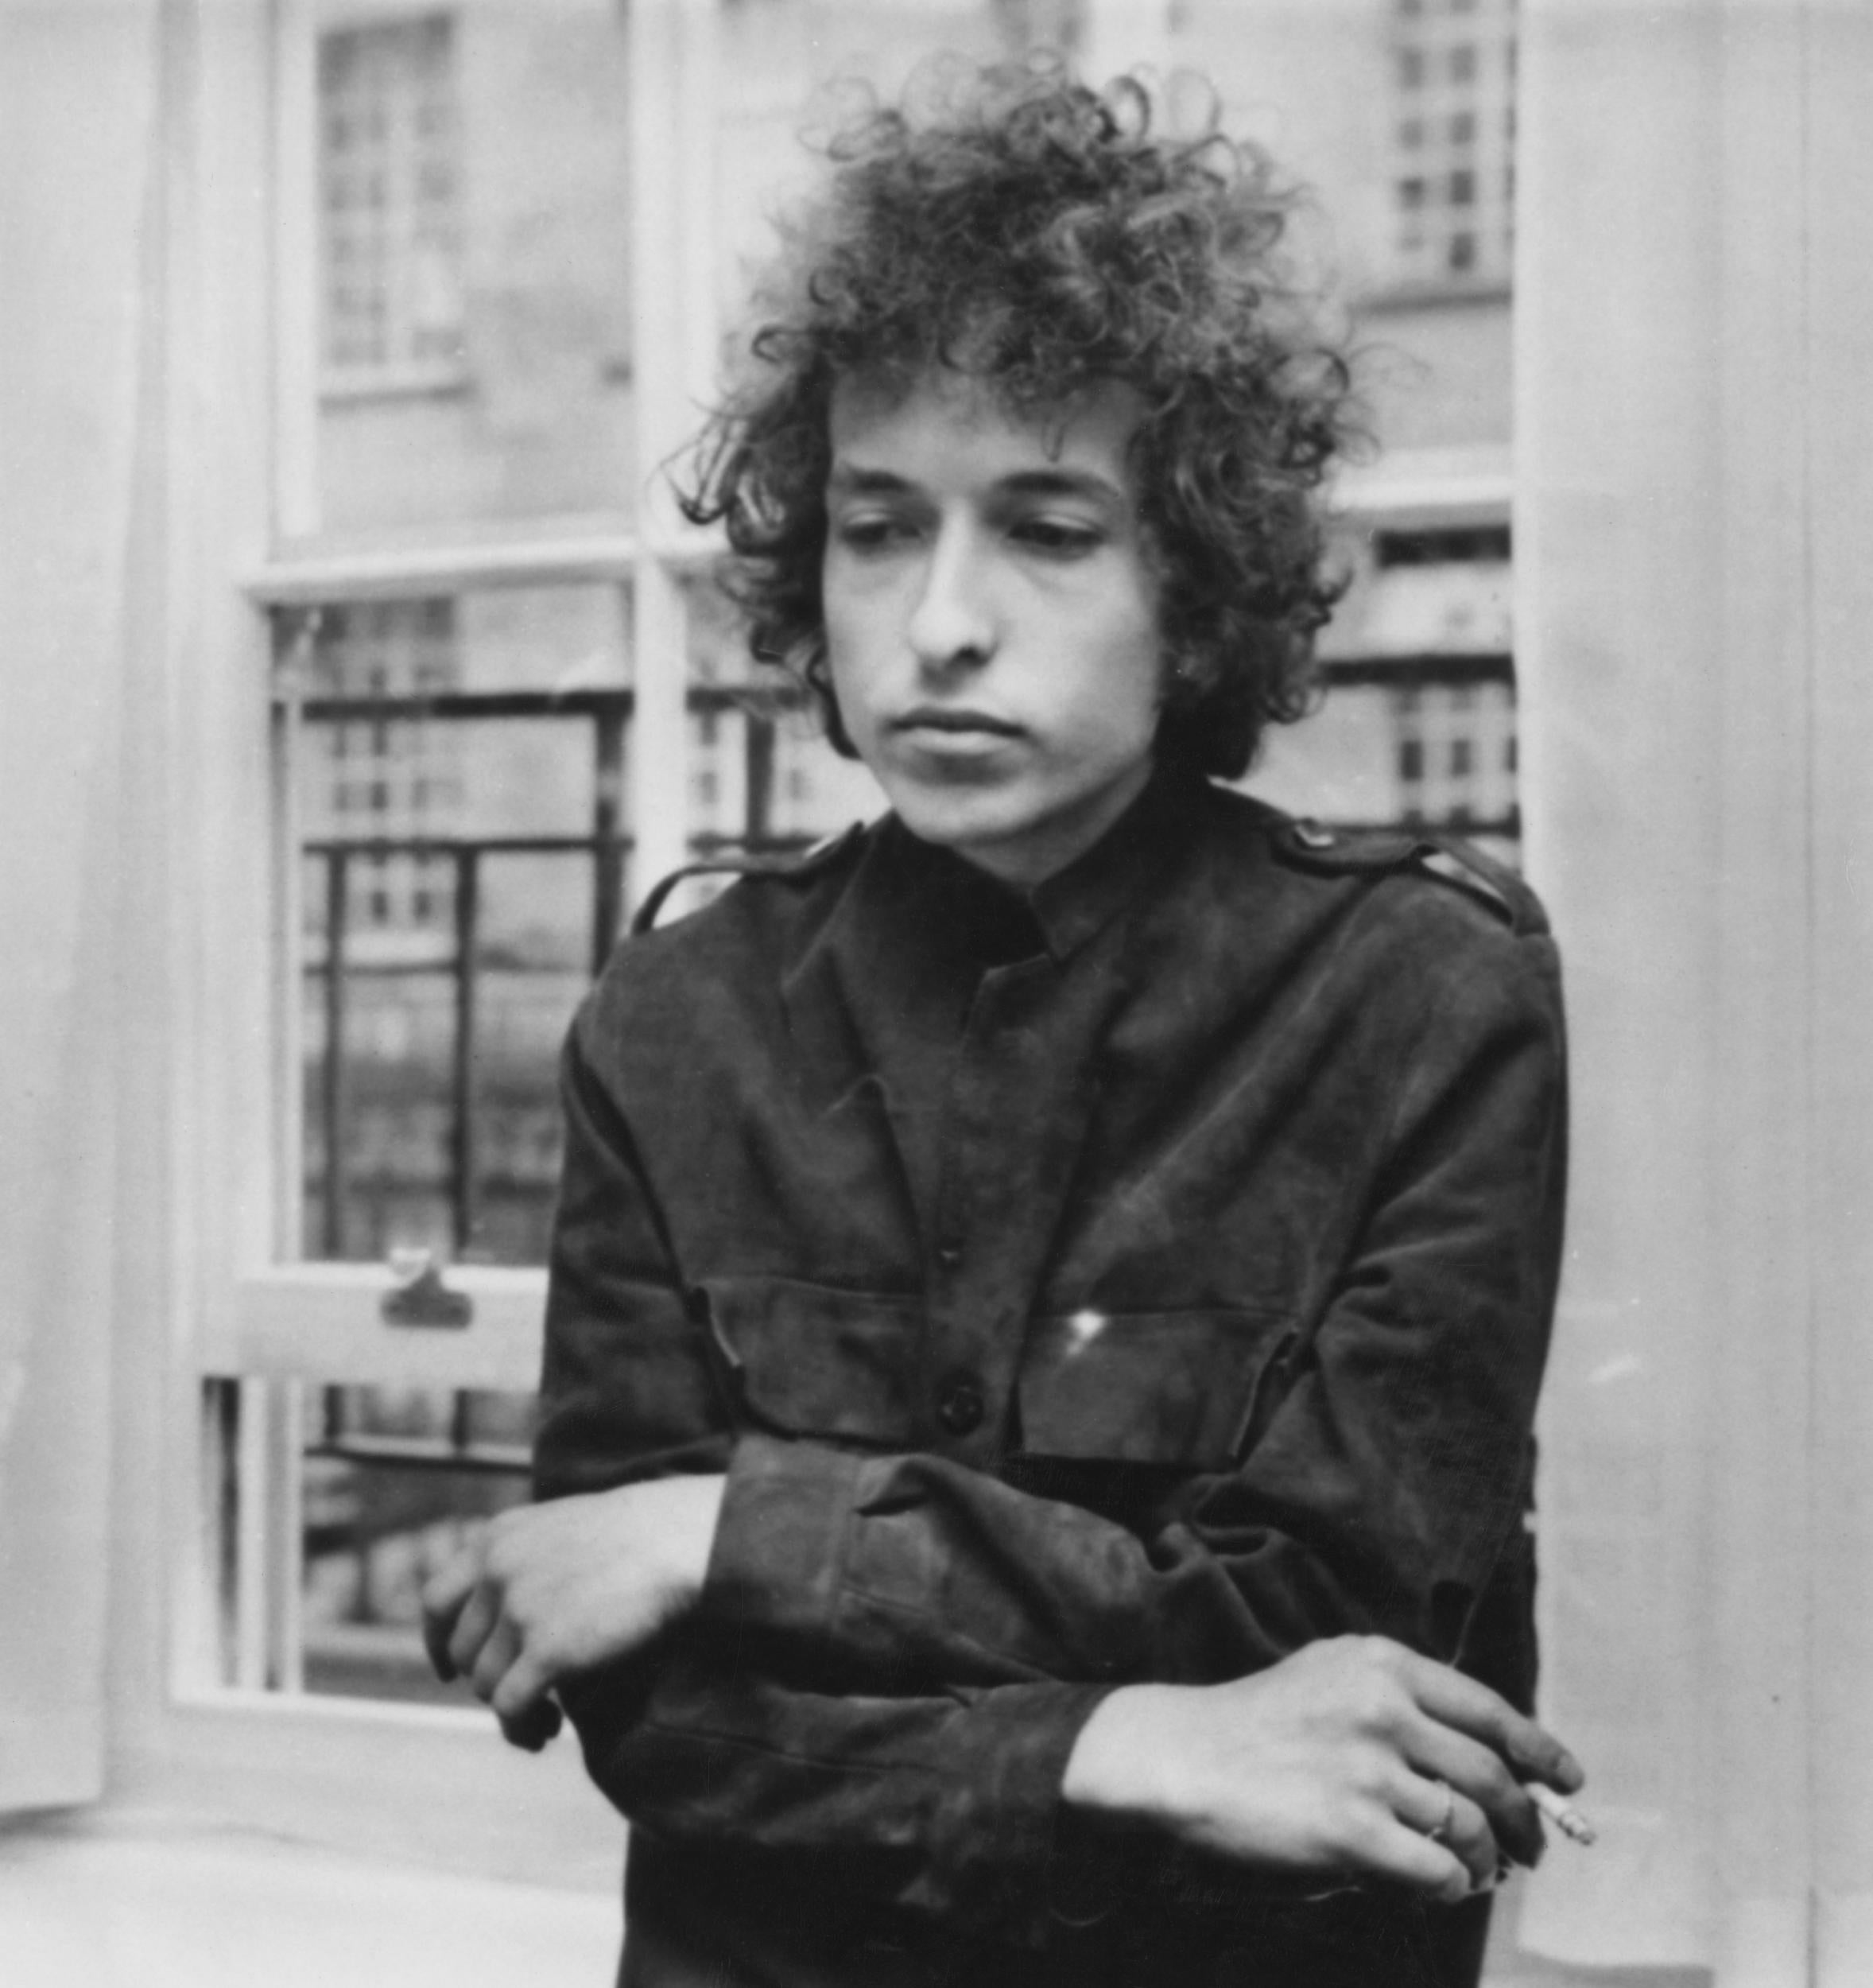 Of course Bob Dylan ignored the Nobel Prize, he's the the